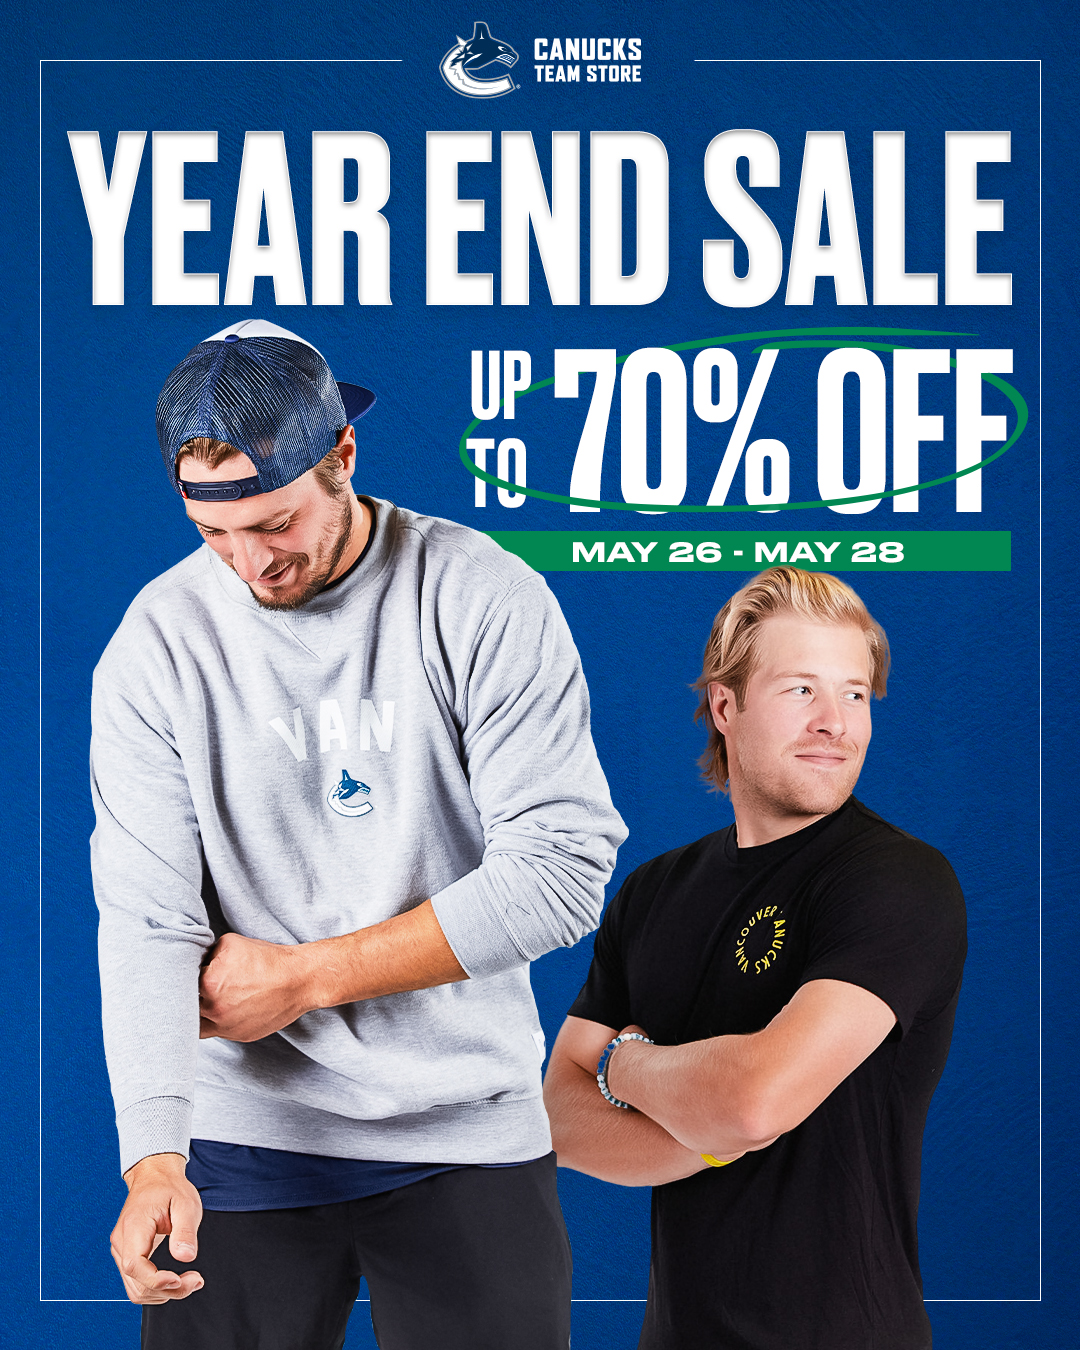 Vancouver Canucks on X: Our Year End Warehouse Sale is back and